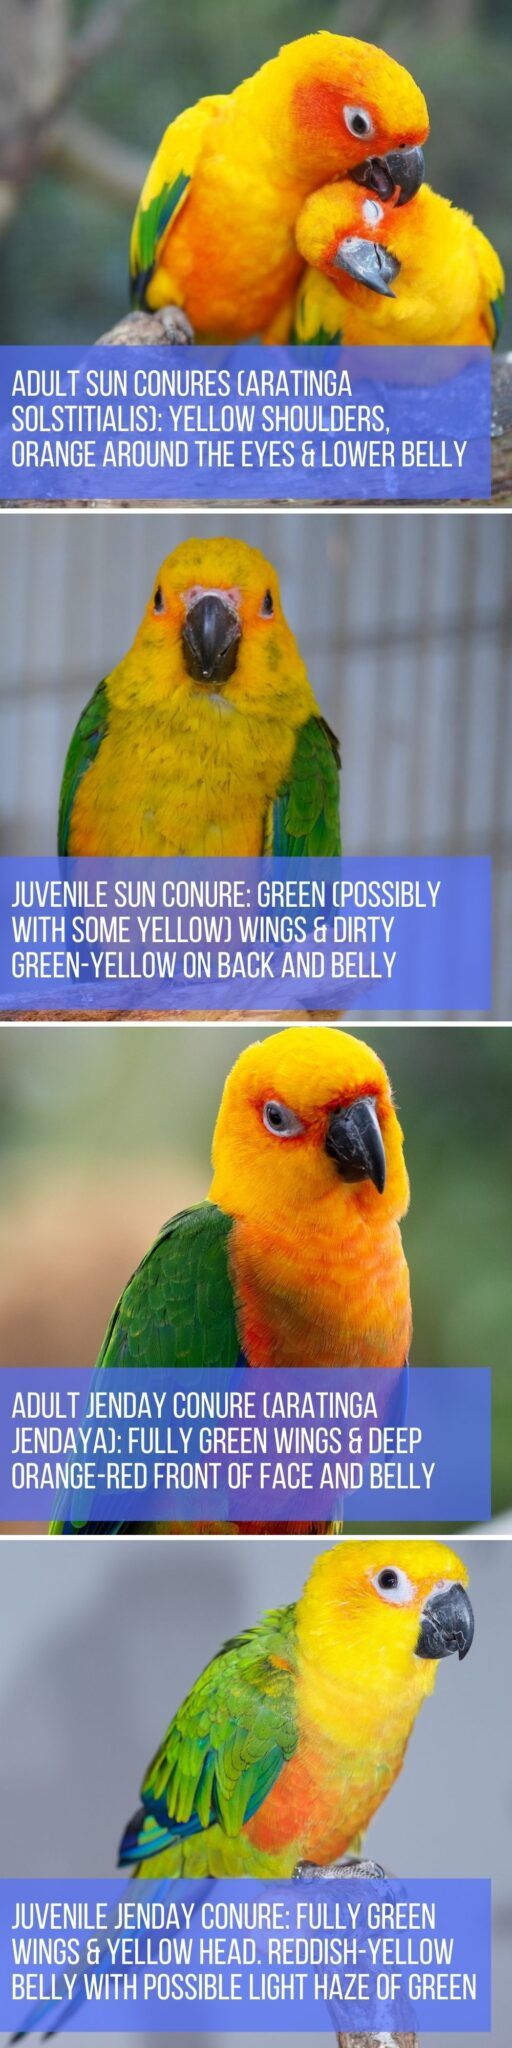 Split image showing the differences between adult and juvenile sun conures and jenday conures